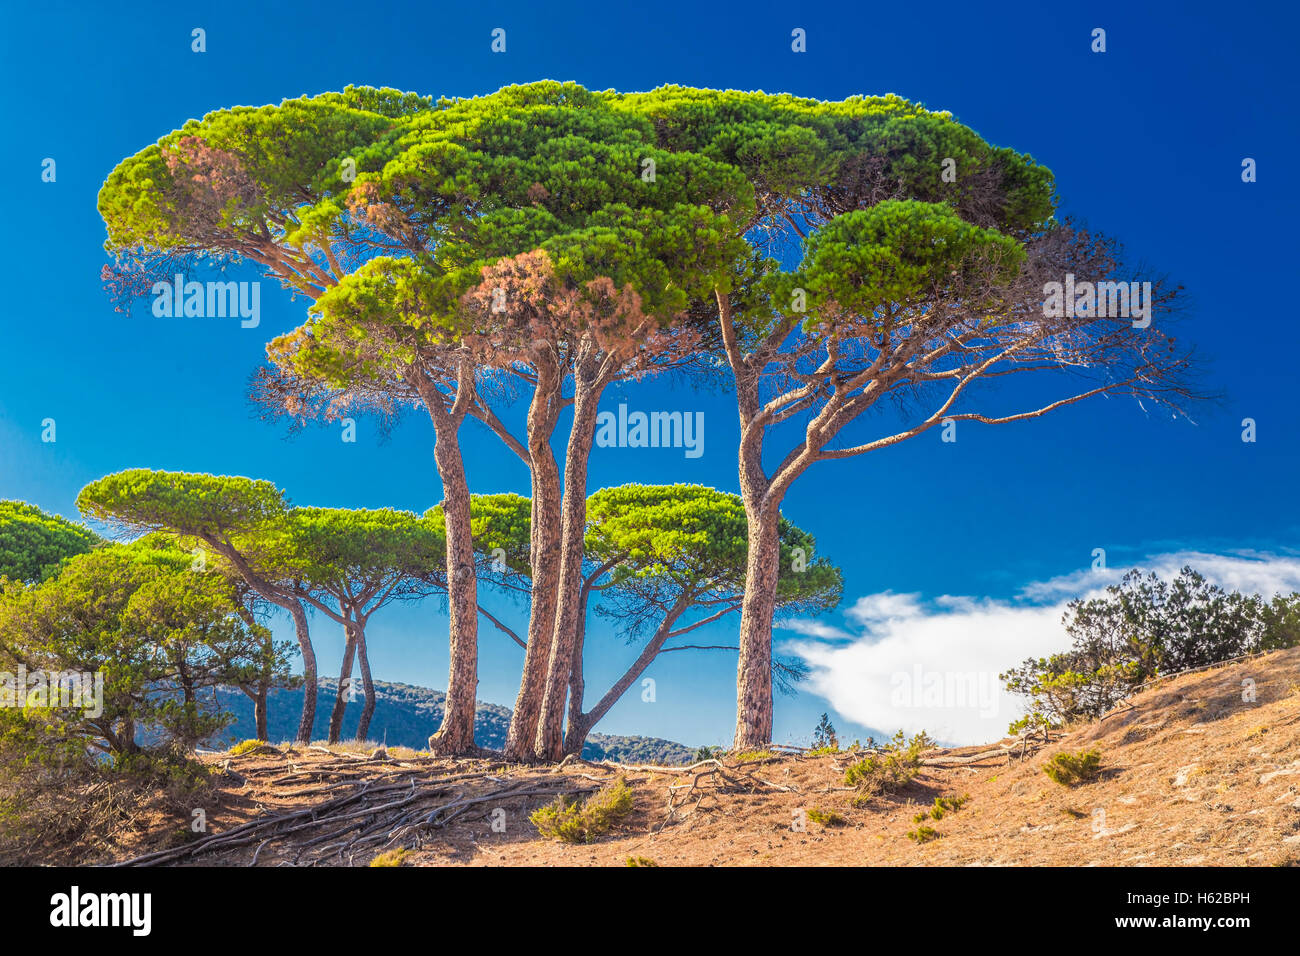 Pine trees on the beach in Corsica island, France, Europe. Stock Photo